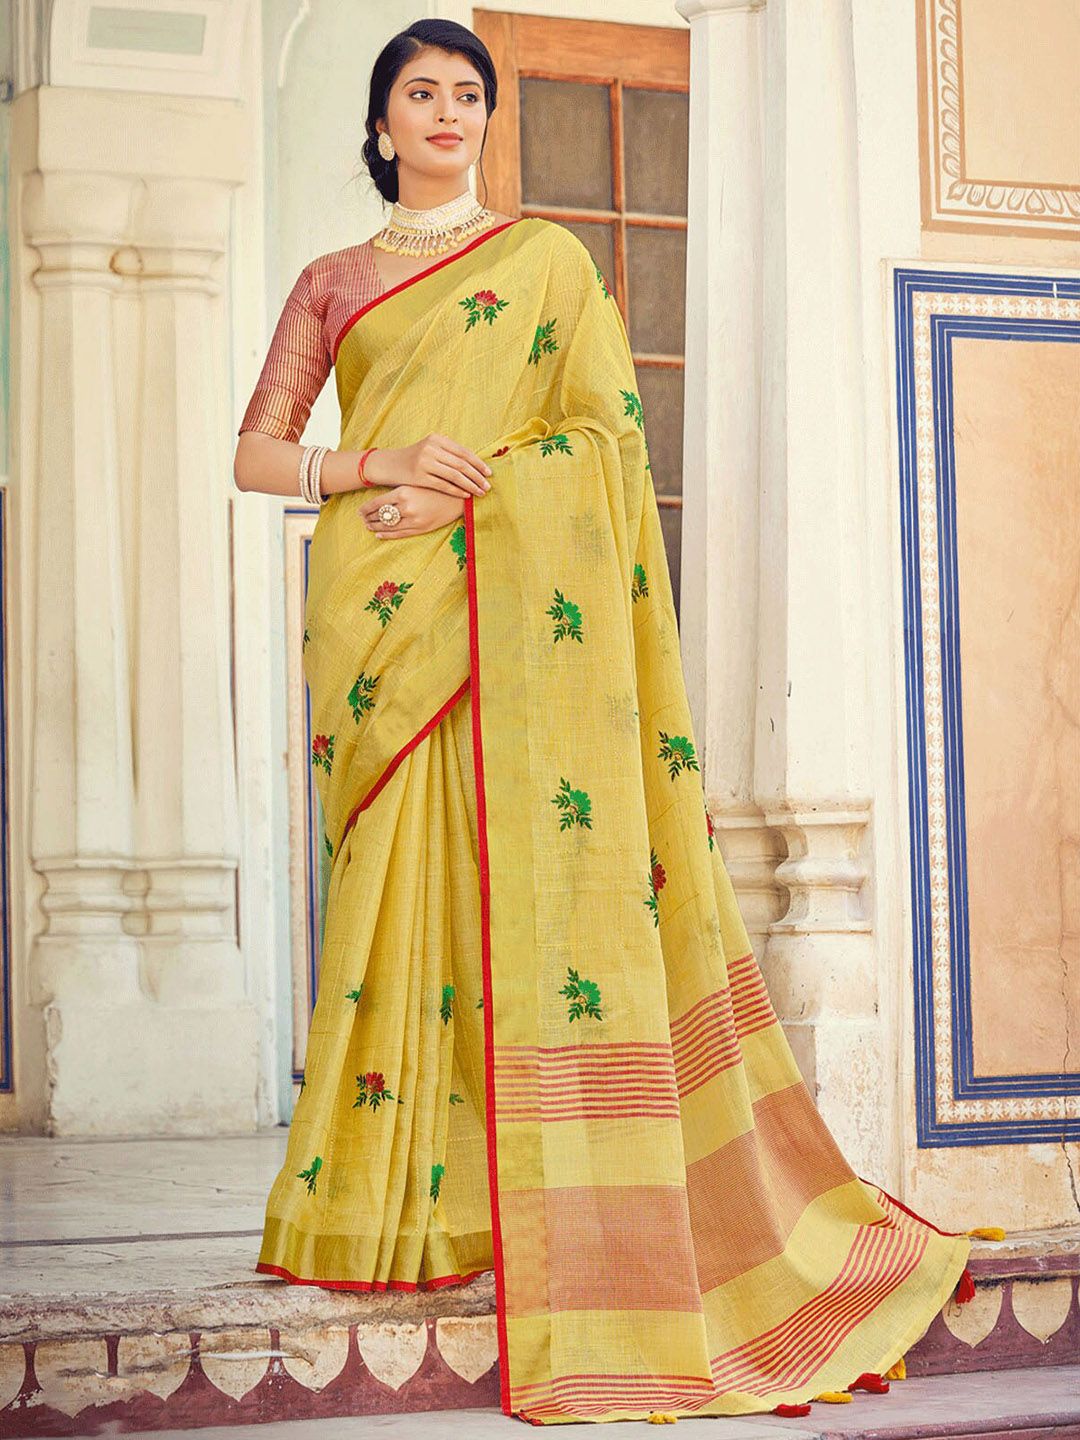 ODETTE Yellow & Green Floral Linen Blend Saree Price in India